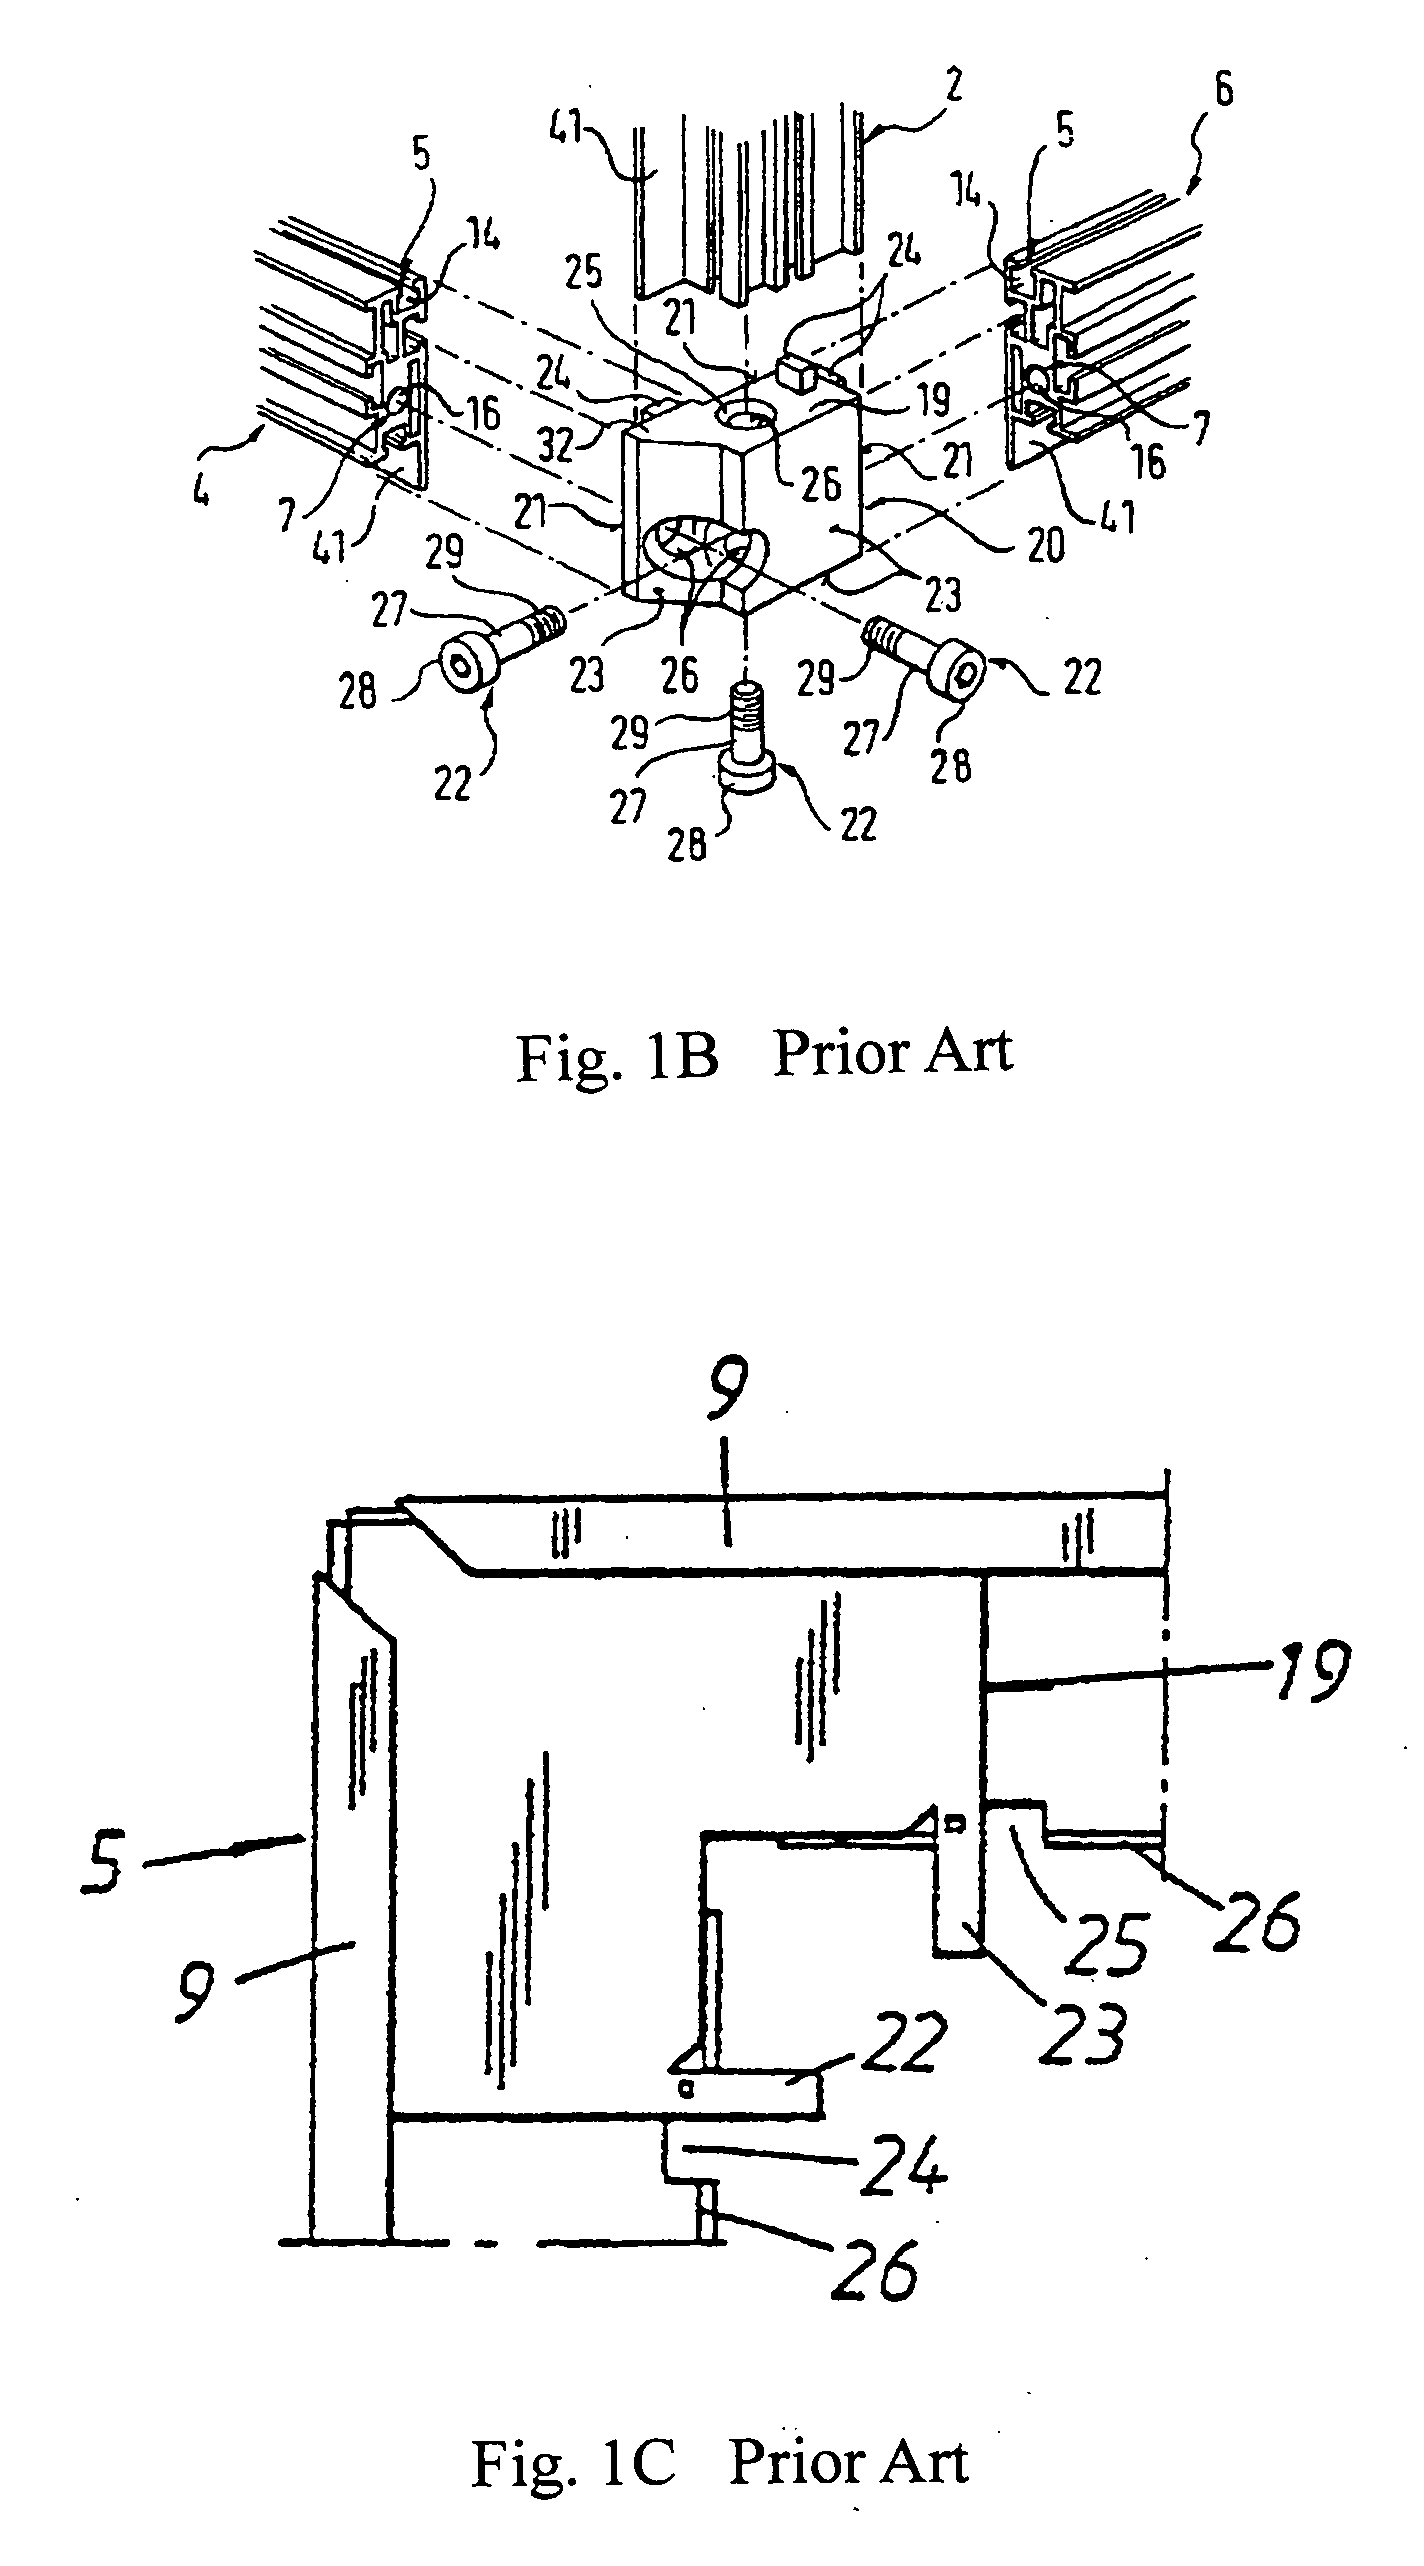 Connection block with bar-adapting trenches for adapting and holding framing bars at fixed orientations